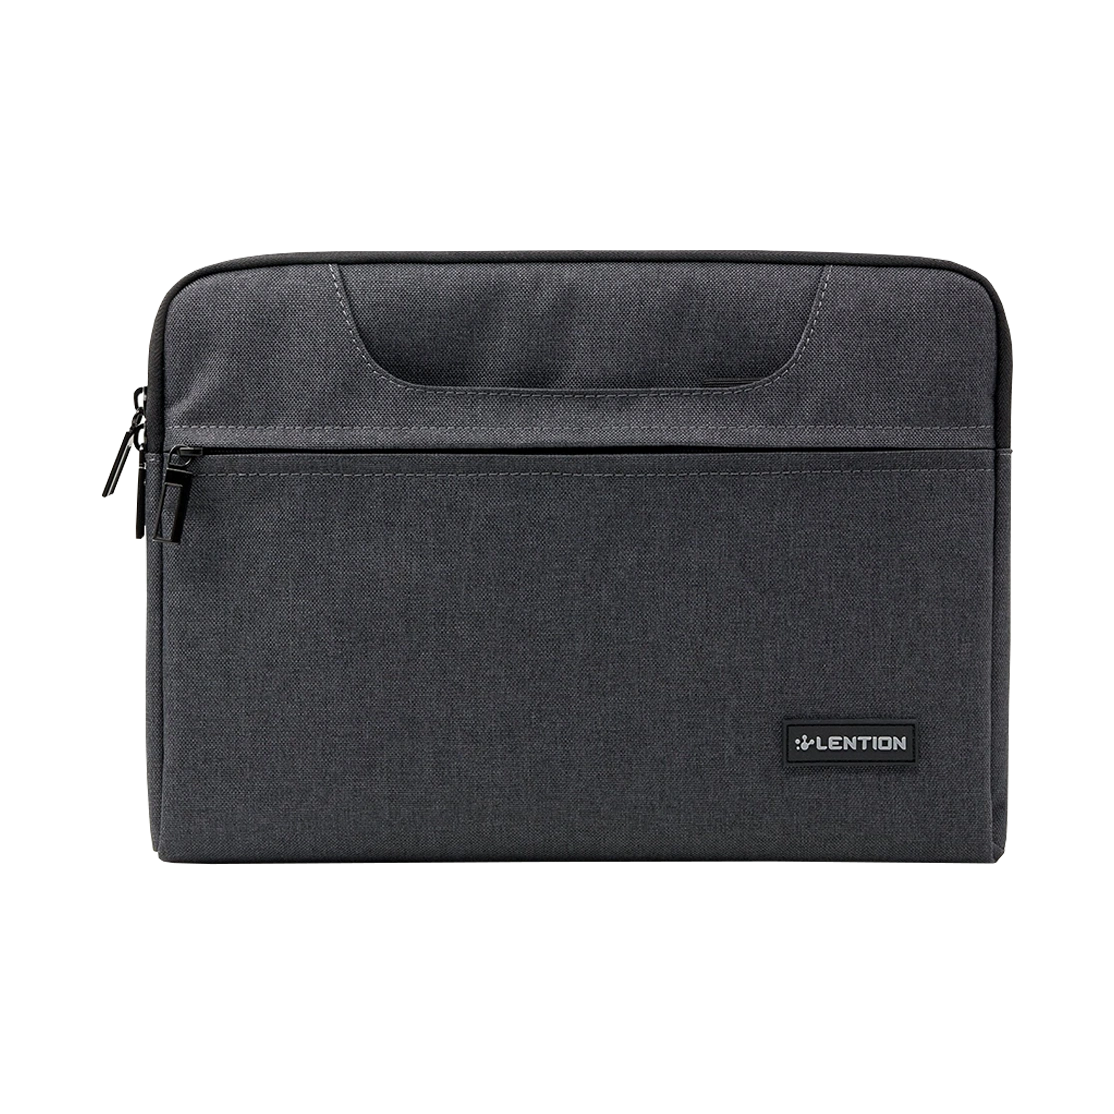 Lention Innovator Laptop Sleeve for Macbook 15-inch PCB-C650